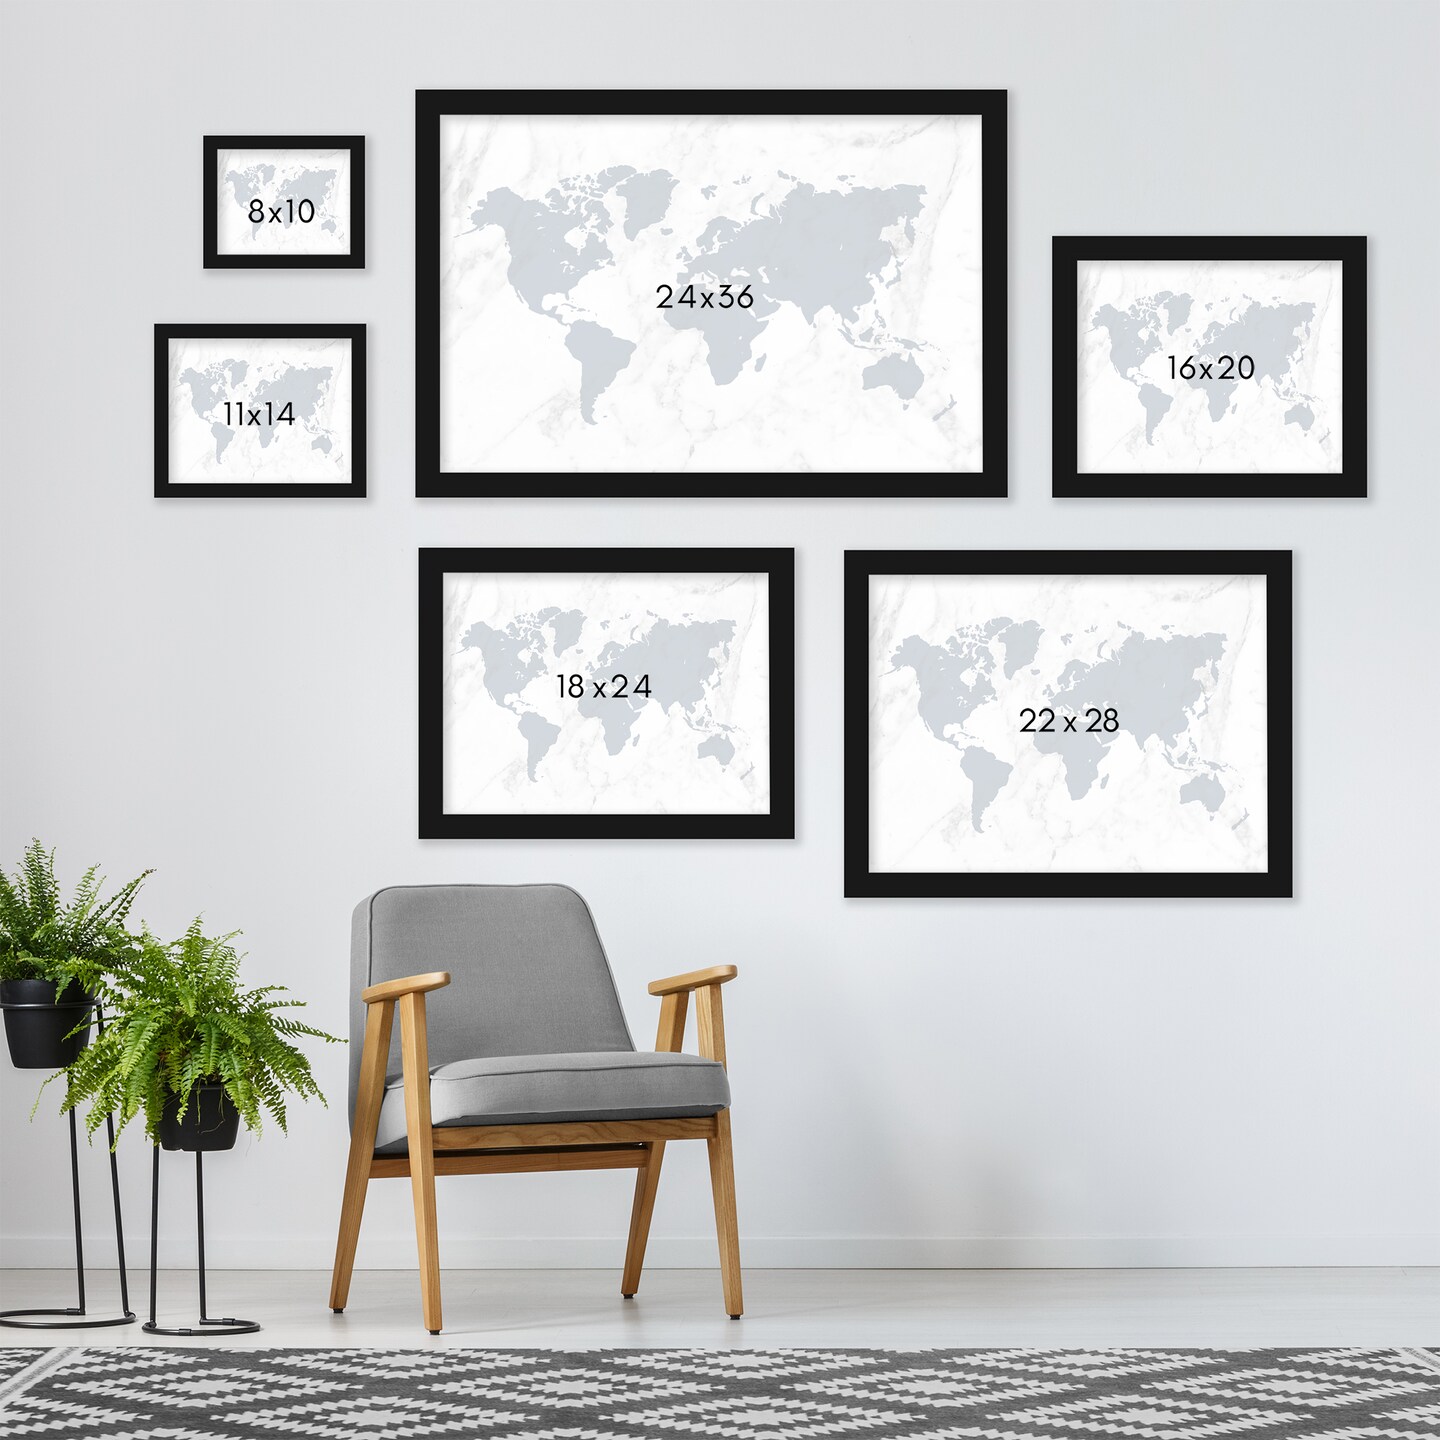 Marble World Map (Navy) by Samantha Ranlet Frame 